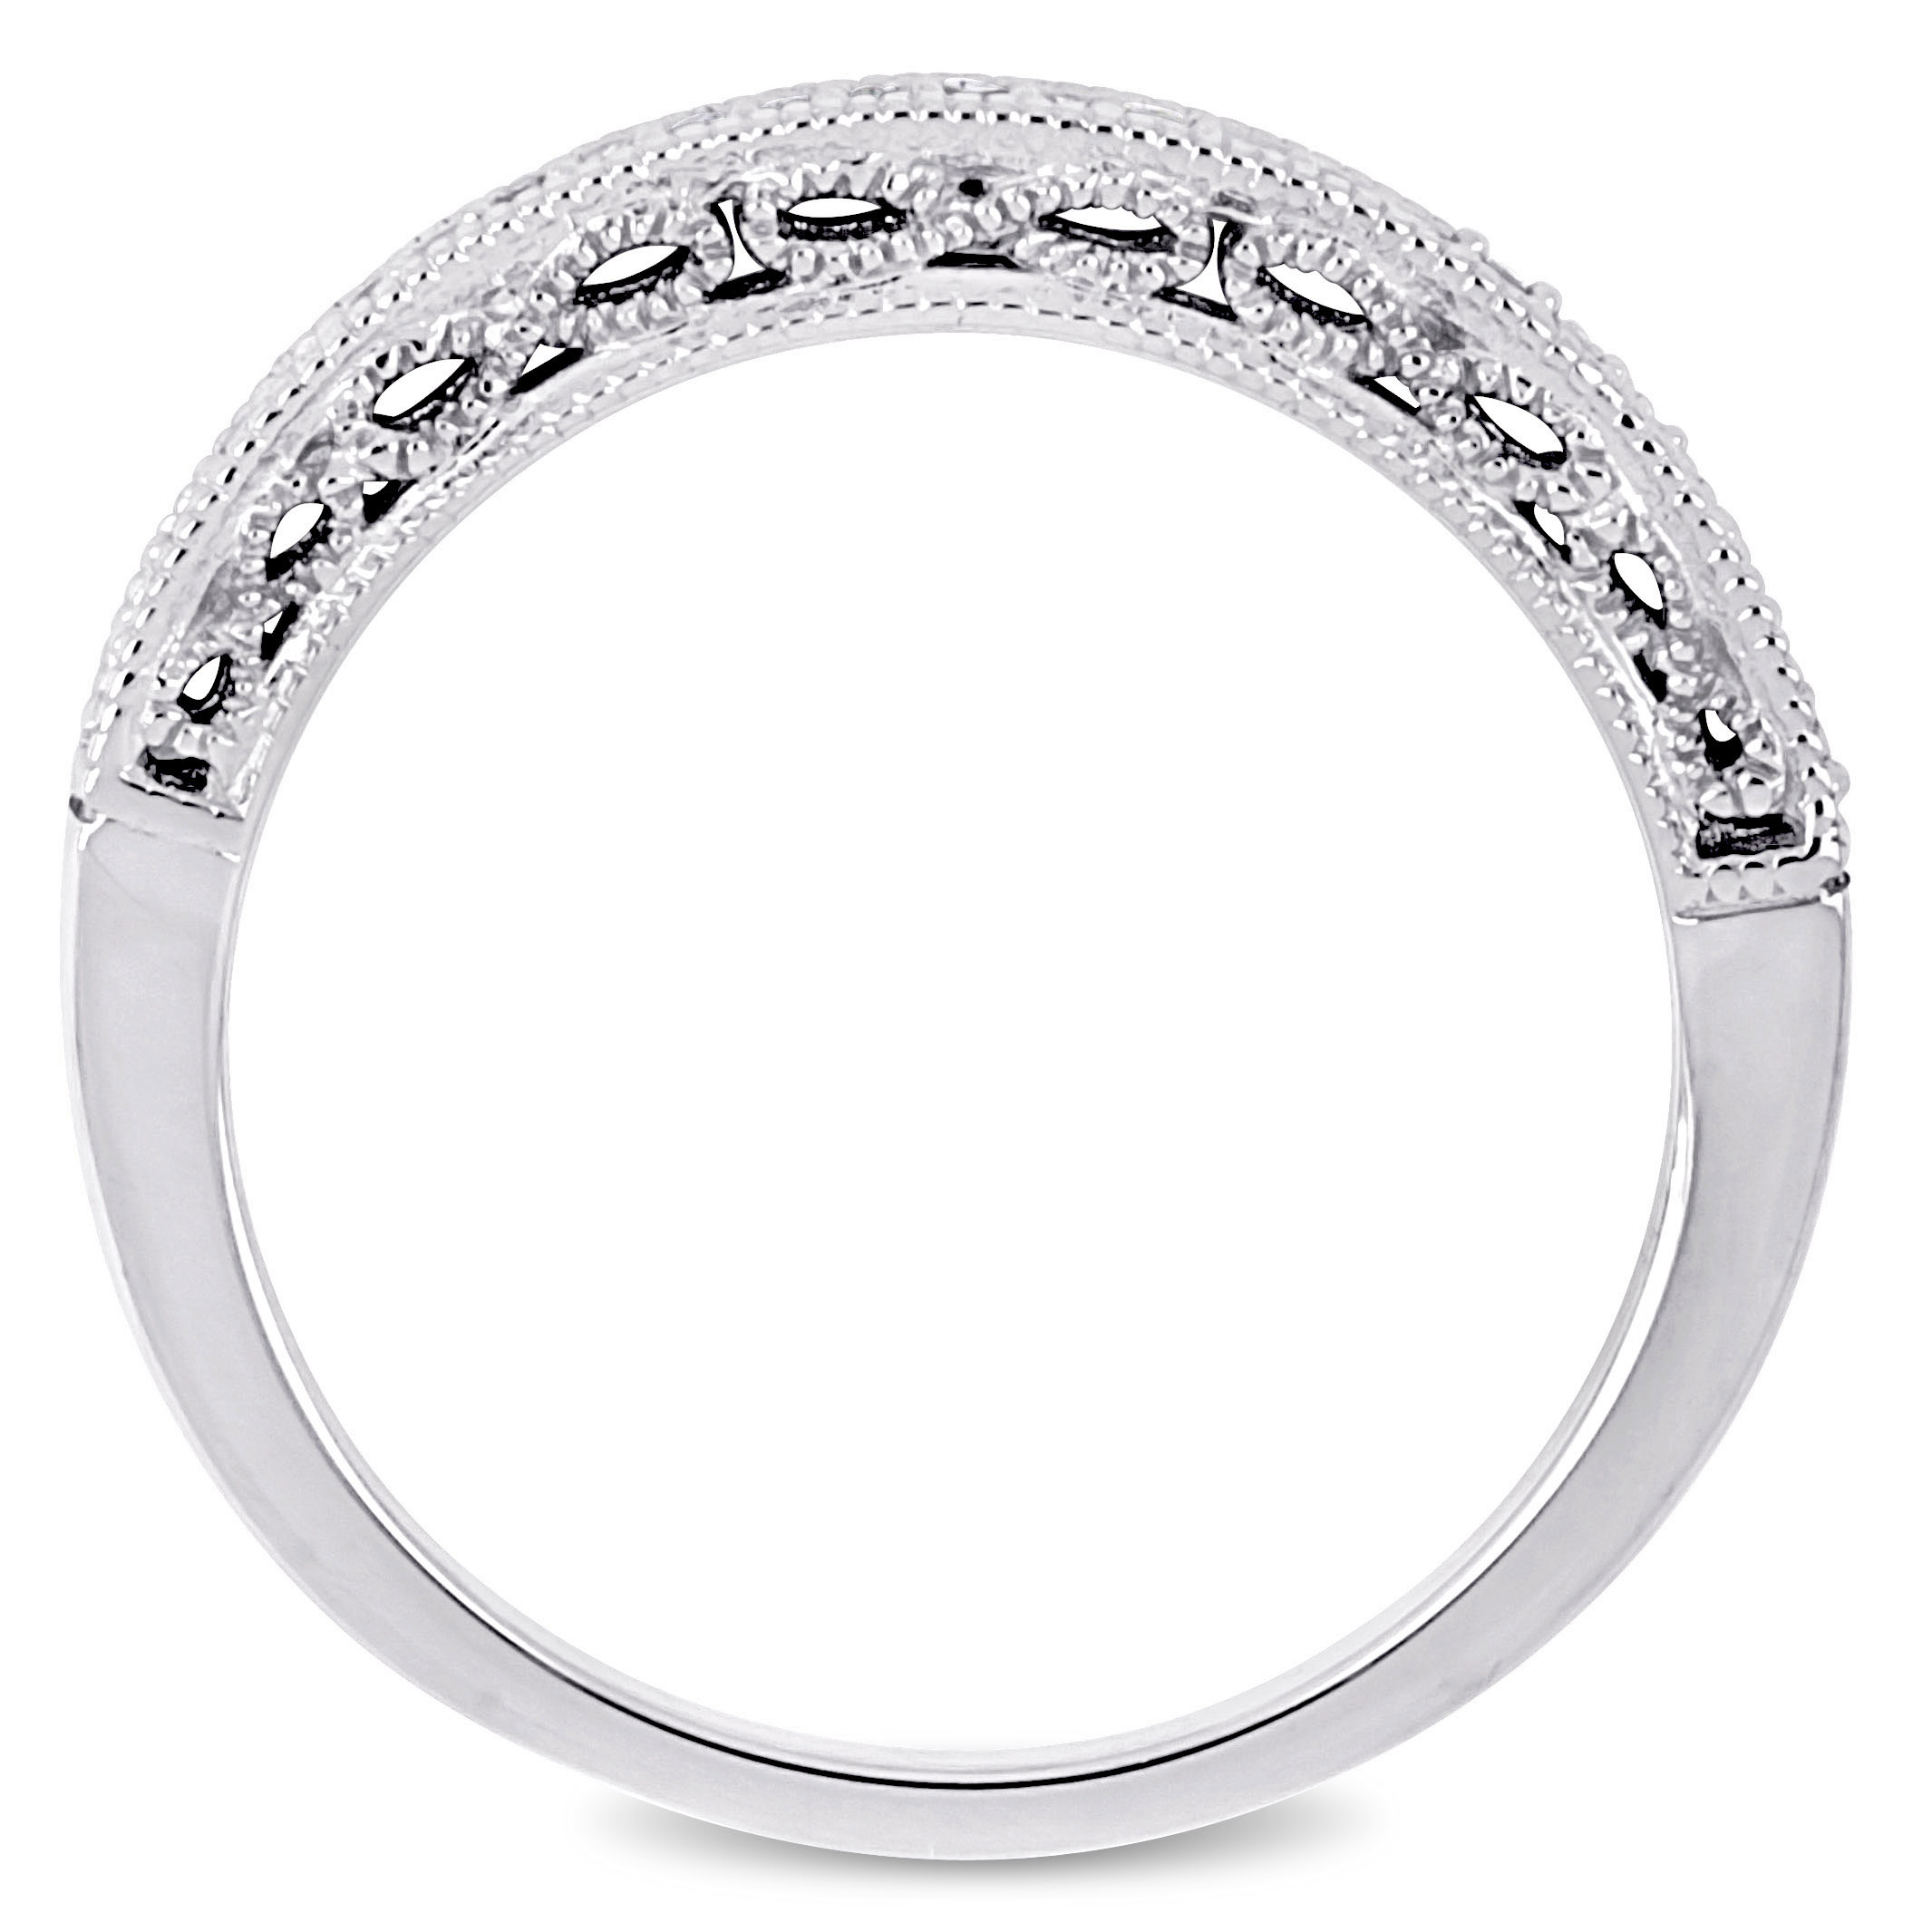 Everly Women's Bridal Engagement Anniversary 1/10 CT T.W. Round-Cut Diamond 10kt White Gold Semi-Eternity Ring with Milgrain Detail and Pave Setting (G-H, I2-I3) - image 5 of 9